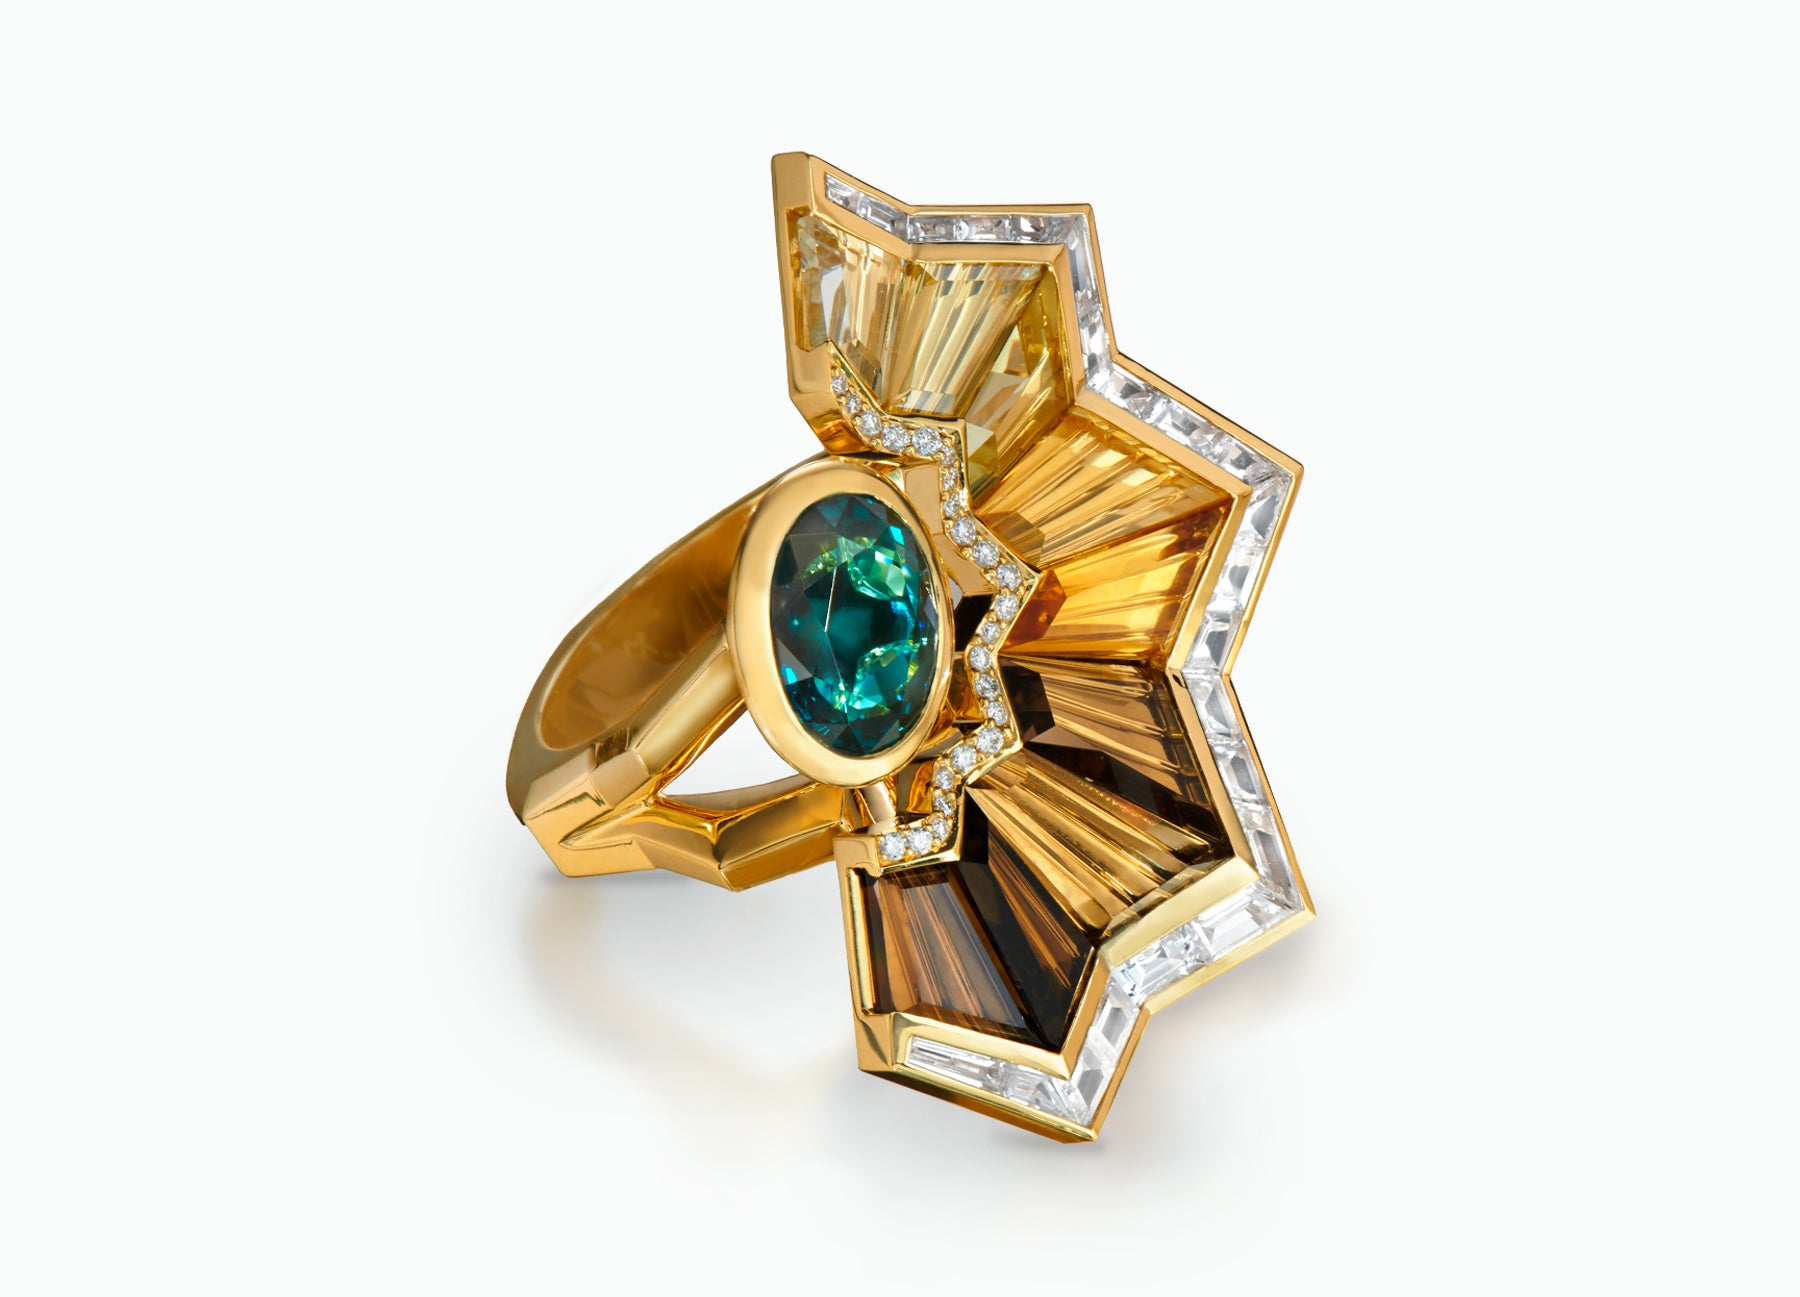 Kaleidoscope Ring crafted in 18k yellow Gold with central green Tourmaline surrounded by smoky Quartz, Citrine, yellow Topaz, clear Crystal, white Sapphires and white Diamonds.